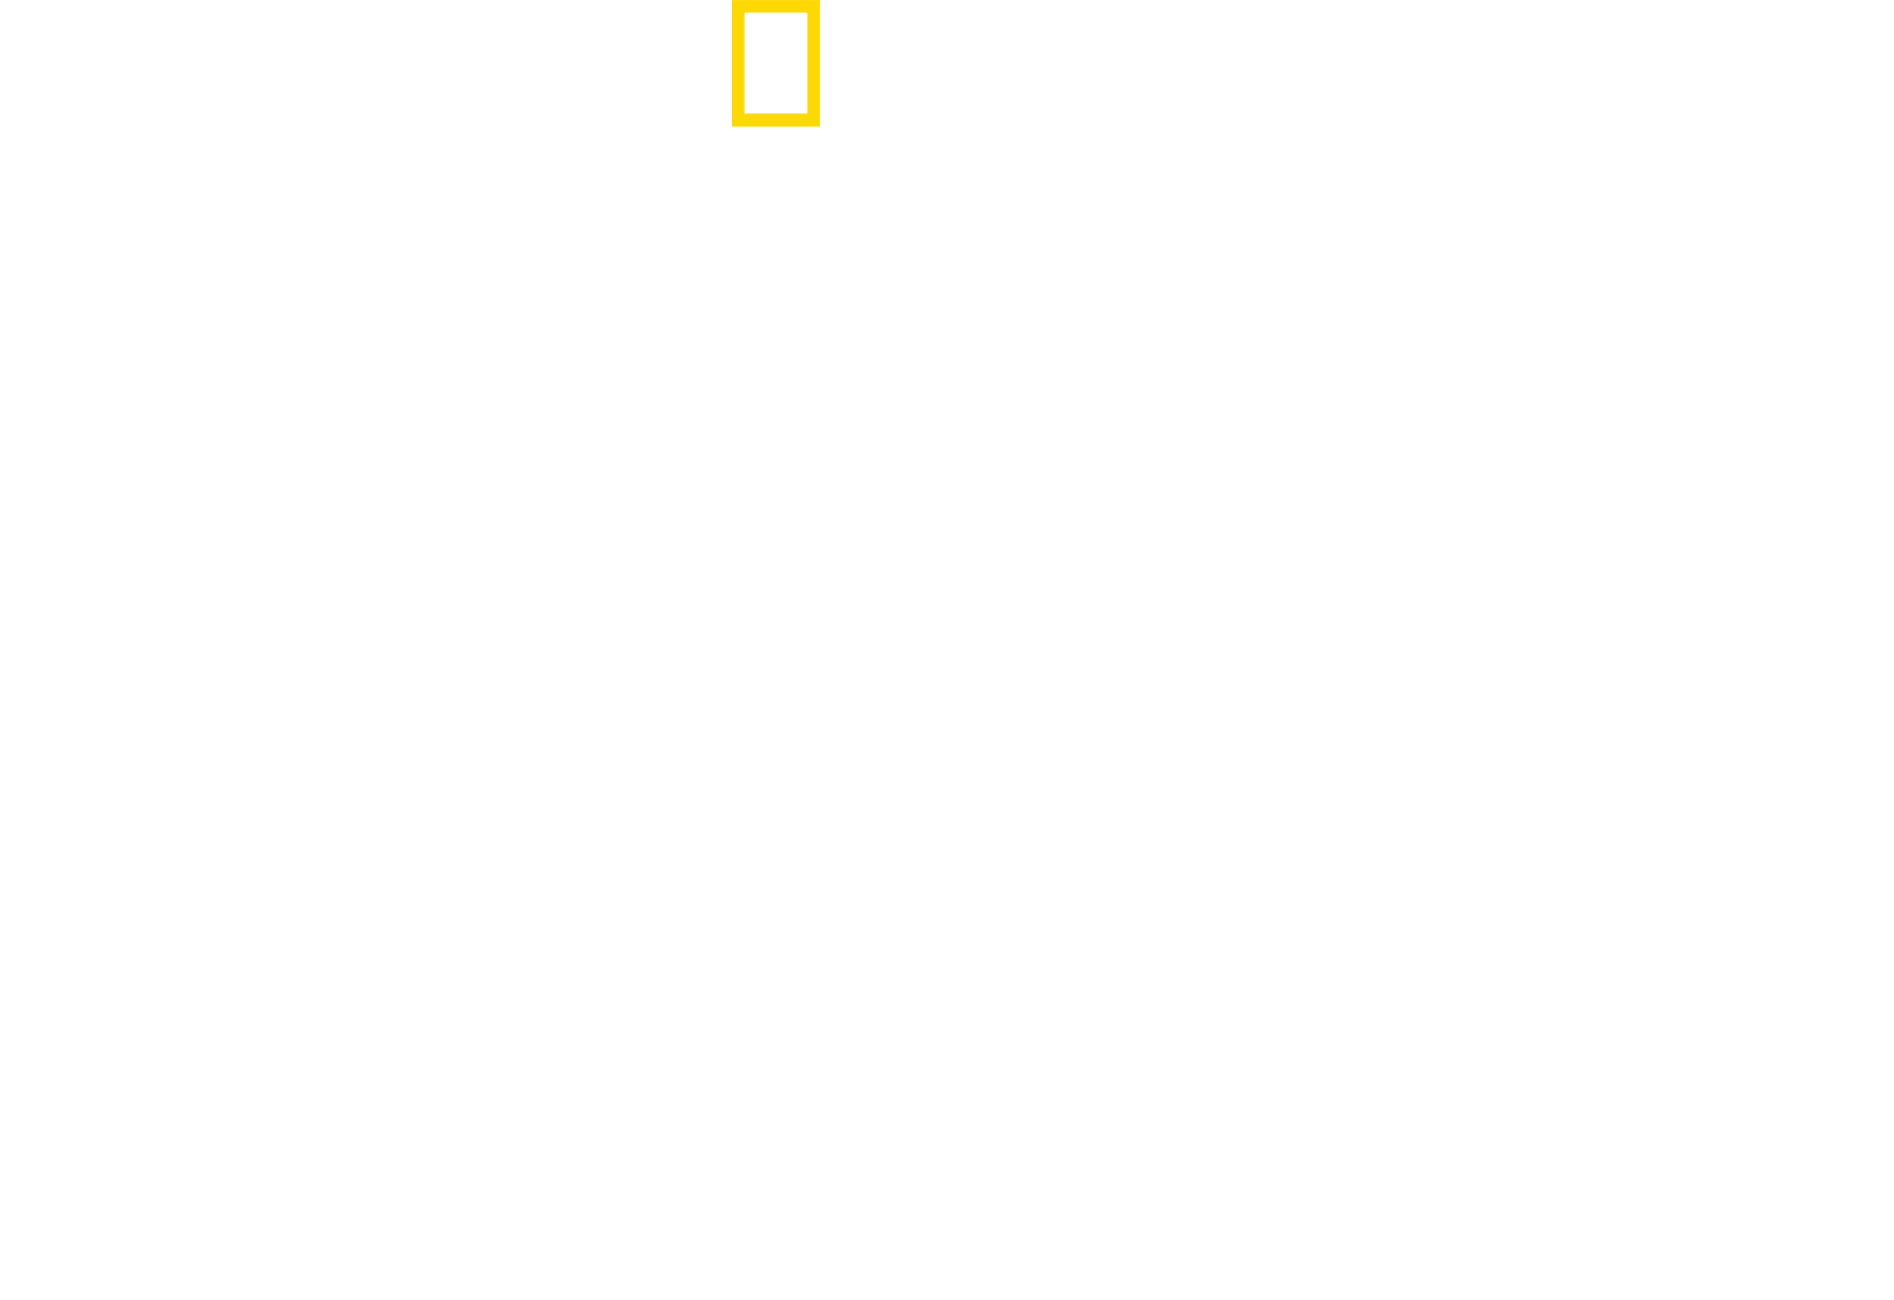 Valley of the Boom logo